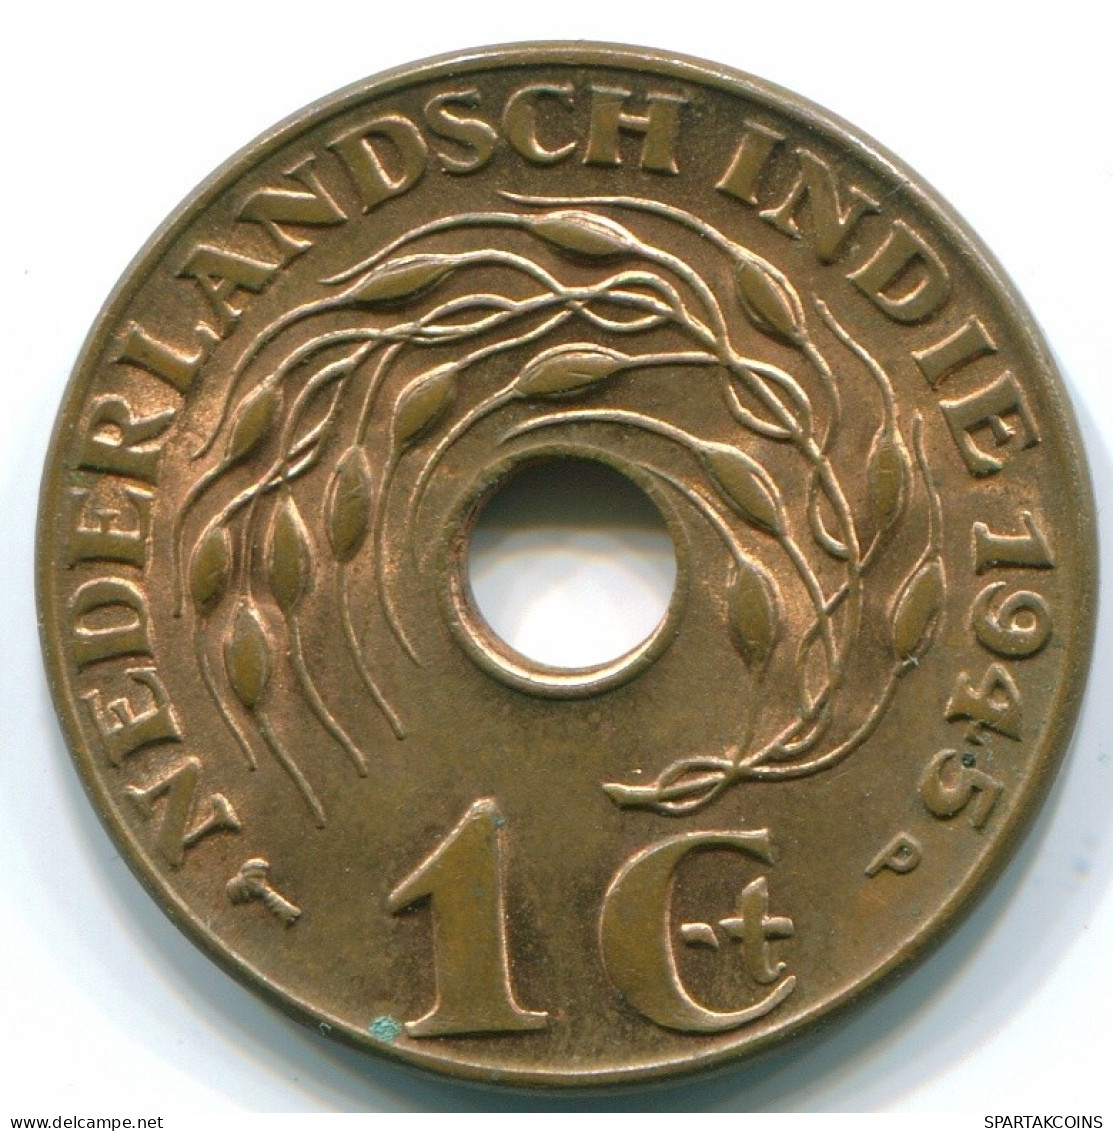 1 CENT 1945 P NETHERLANDS EAST INDIES INDONESIA Bronze Colonial Coin #S10446.U.A - Indes Neerlandesas